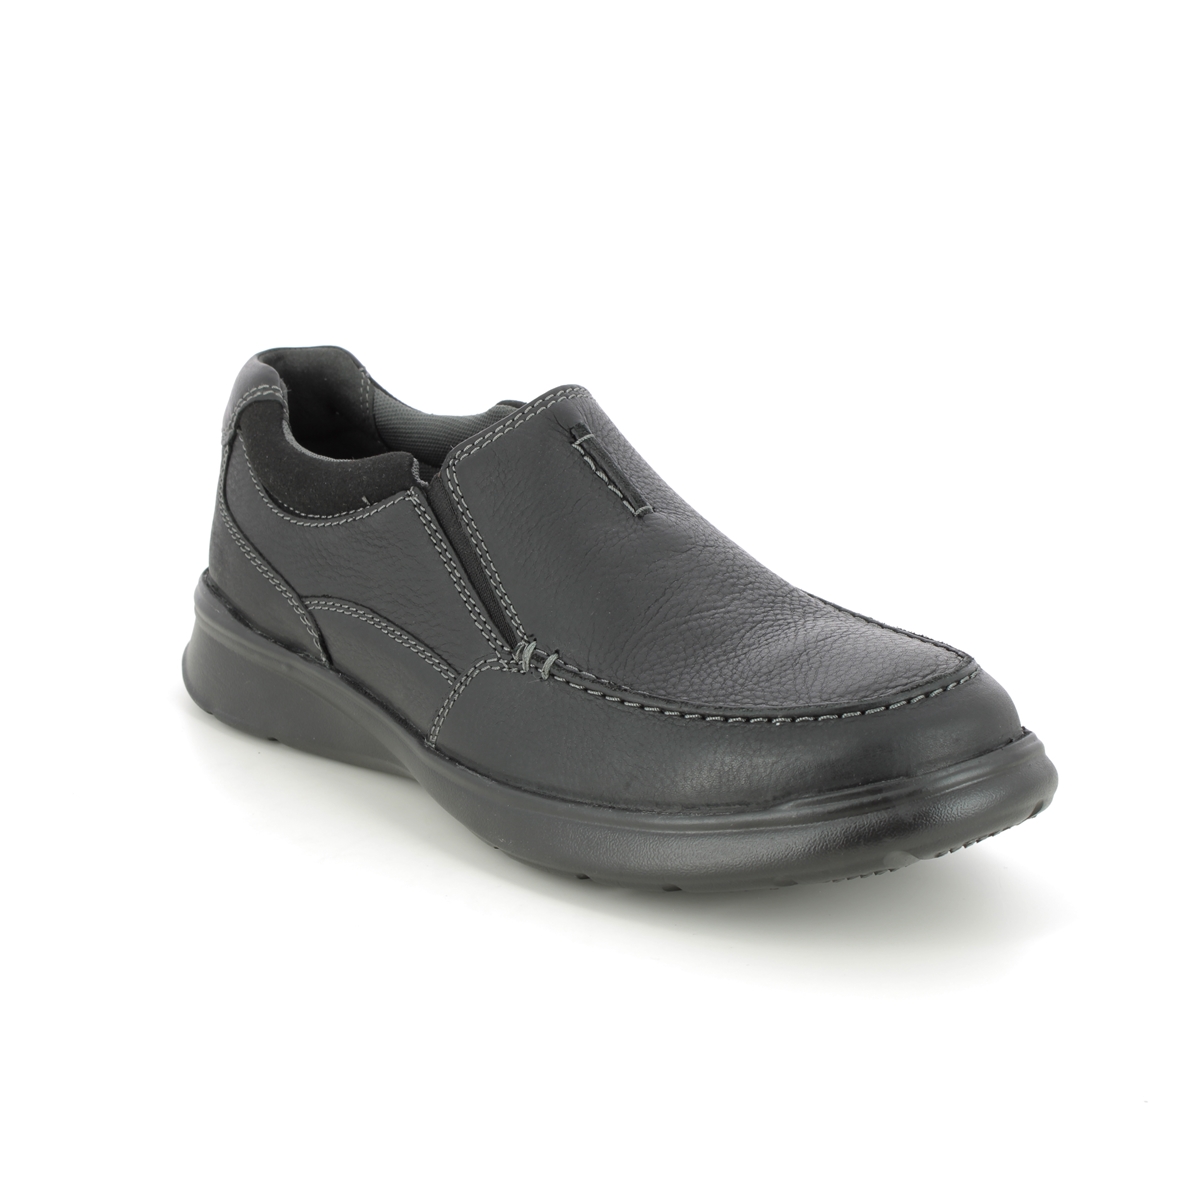 Clarks Cotrell Free Black Mens Slip-on Shoes 3159-38H in a Plain Leather in Size 6